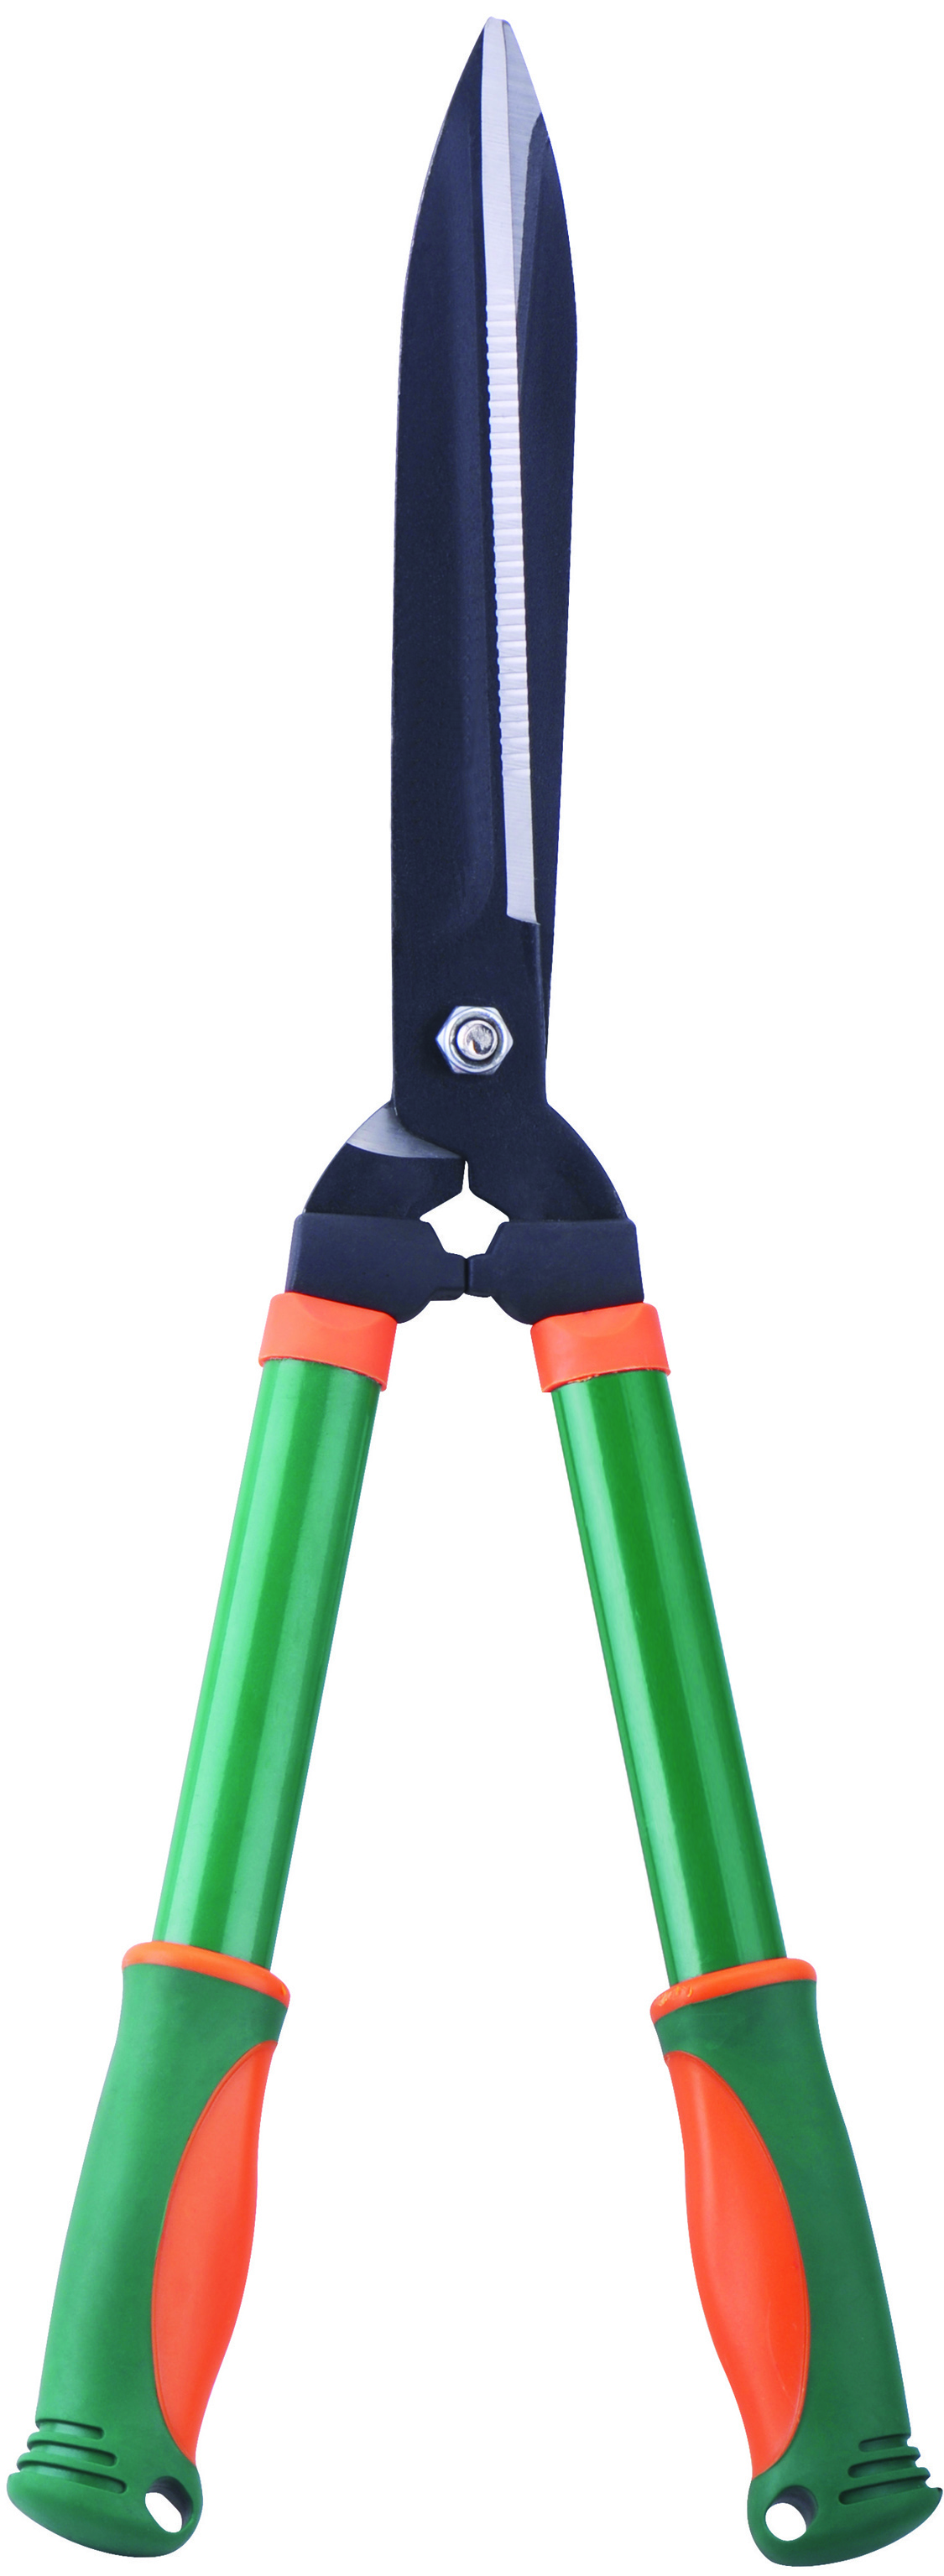 PANYI HEDGE CLIPPER ABS HANDLE